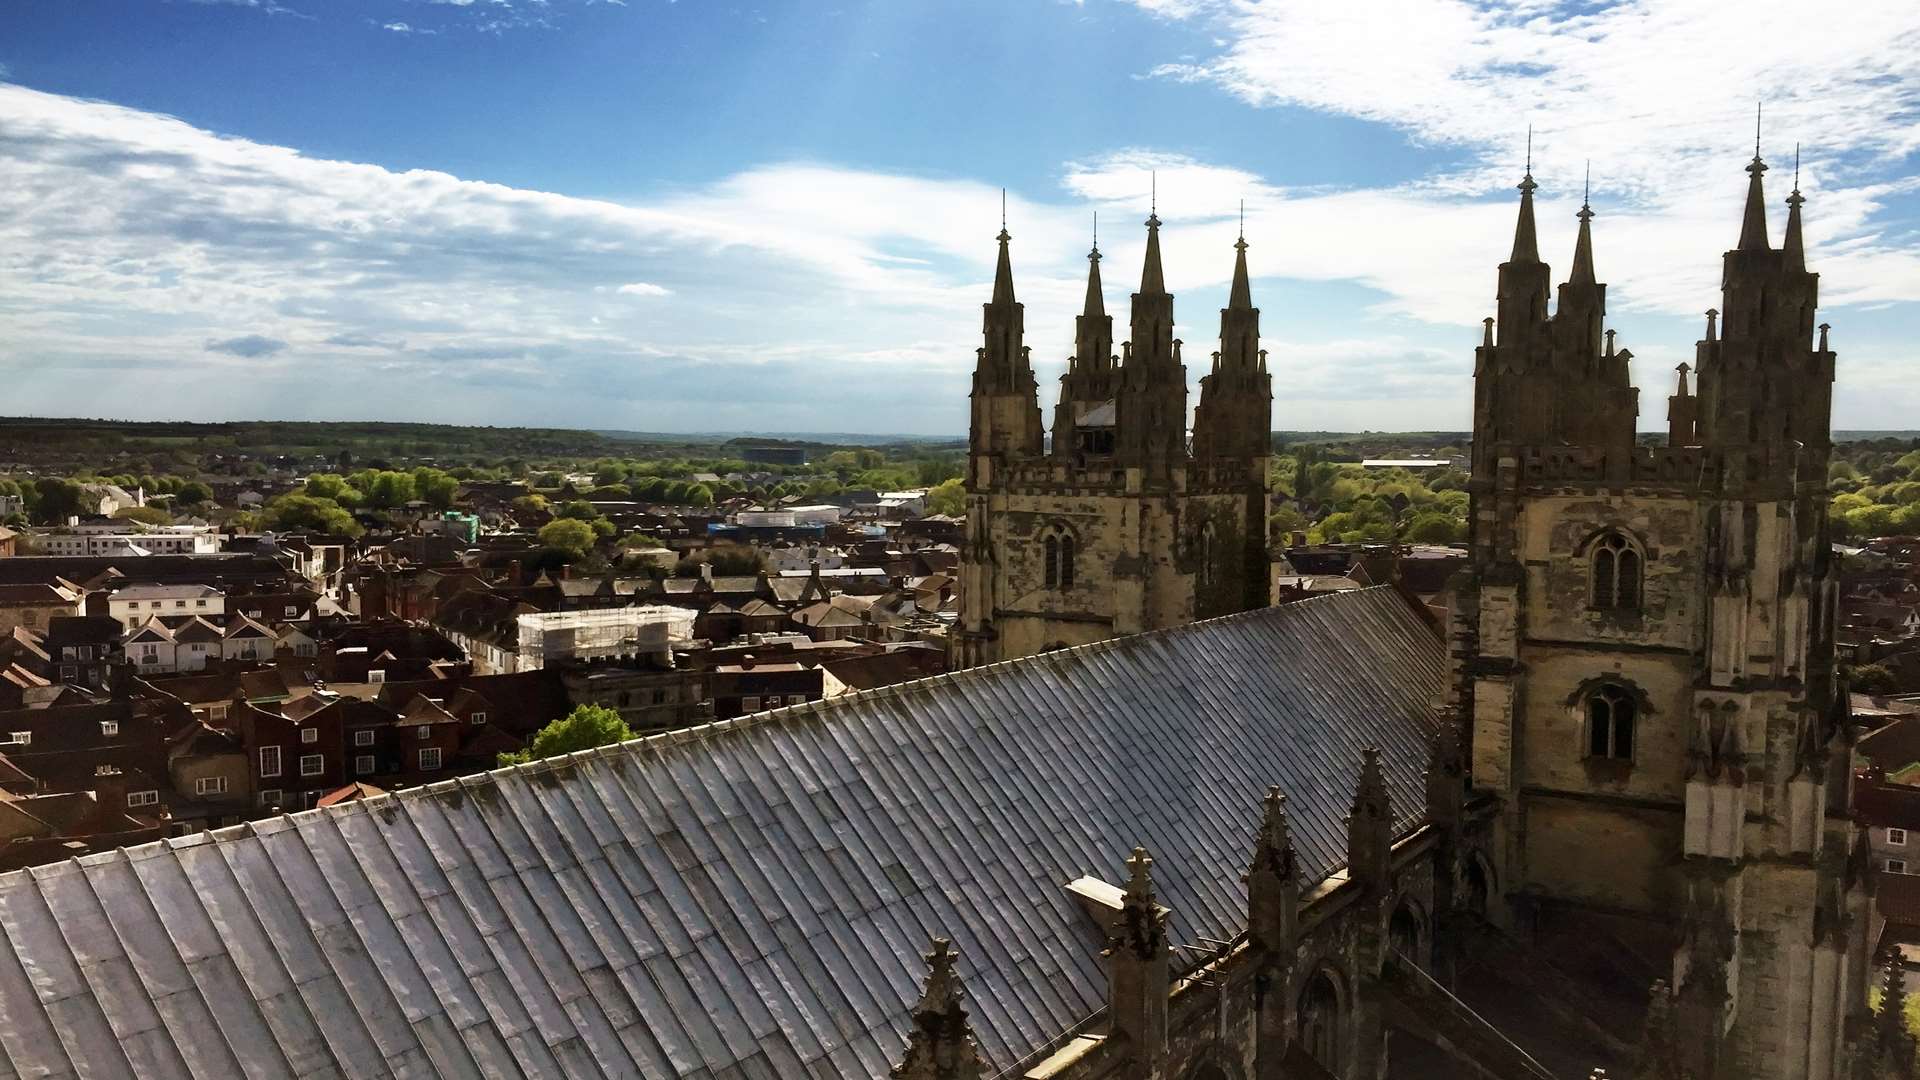 Canterbury is the best place to live in Kent, according to one survey